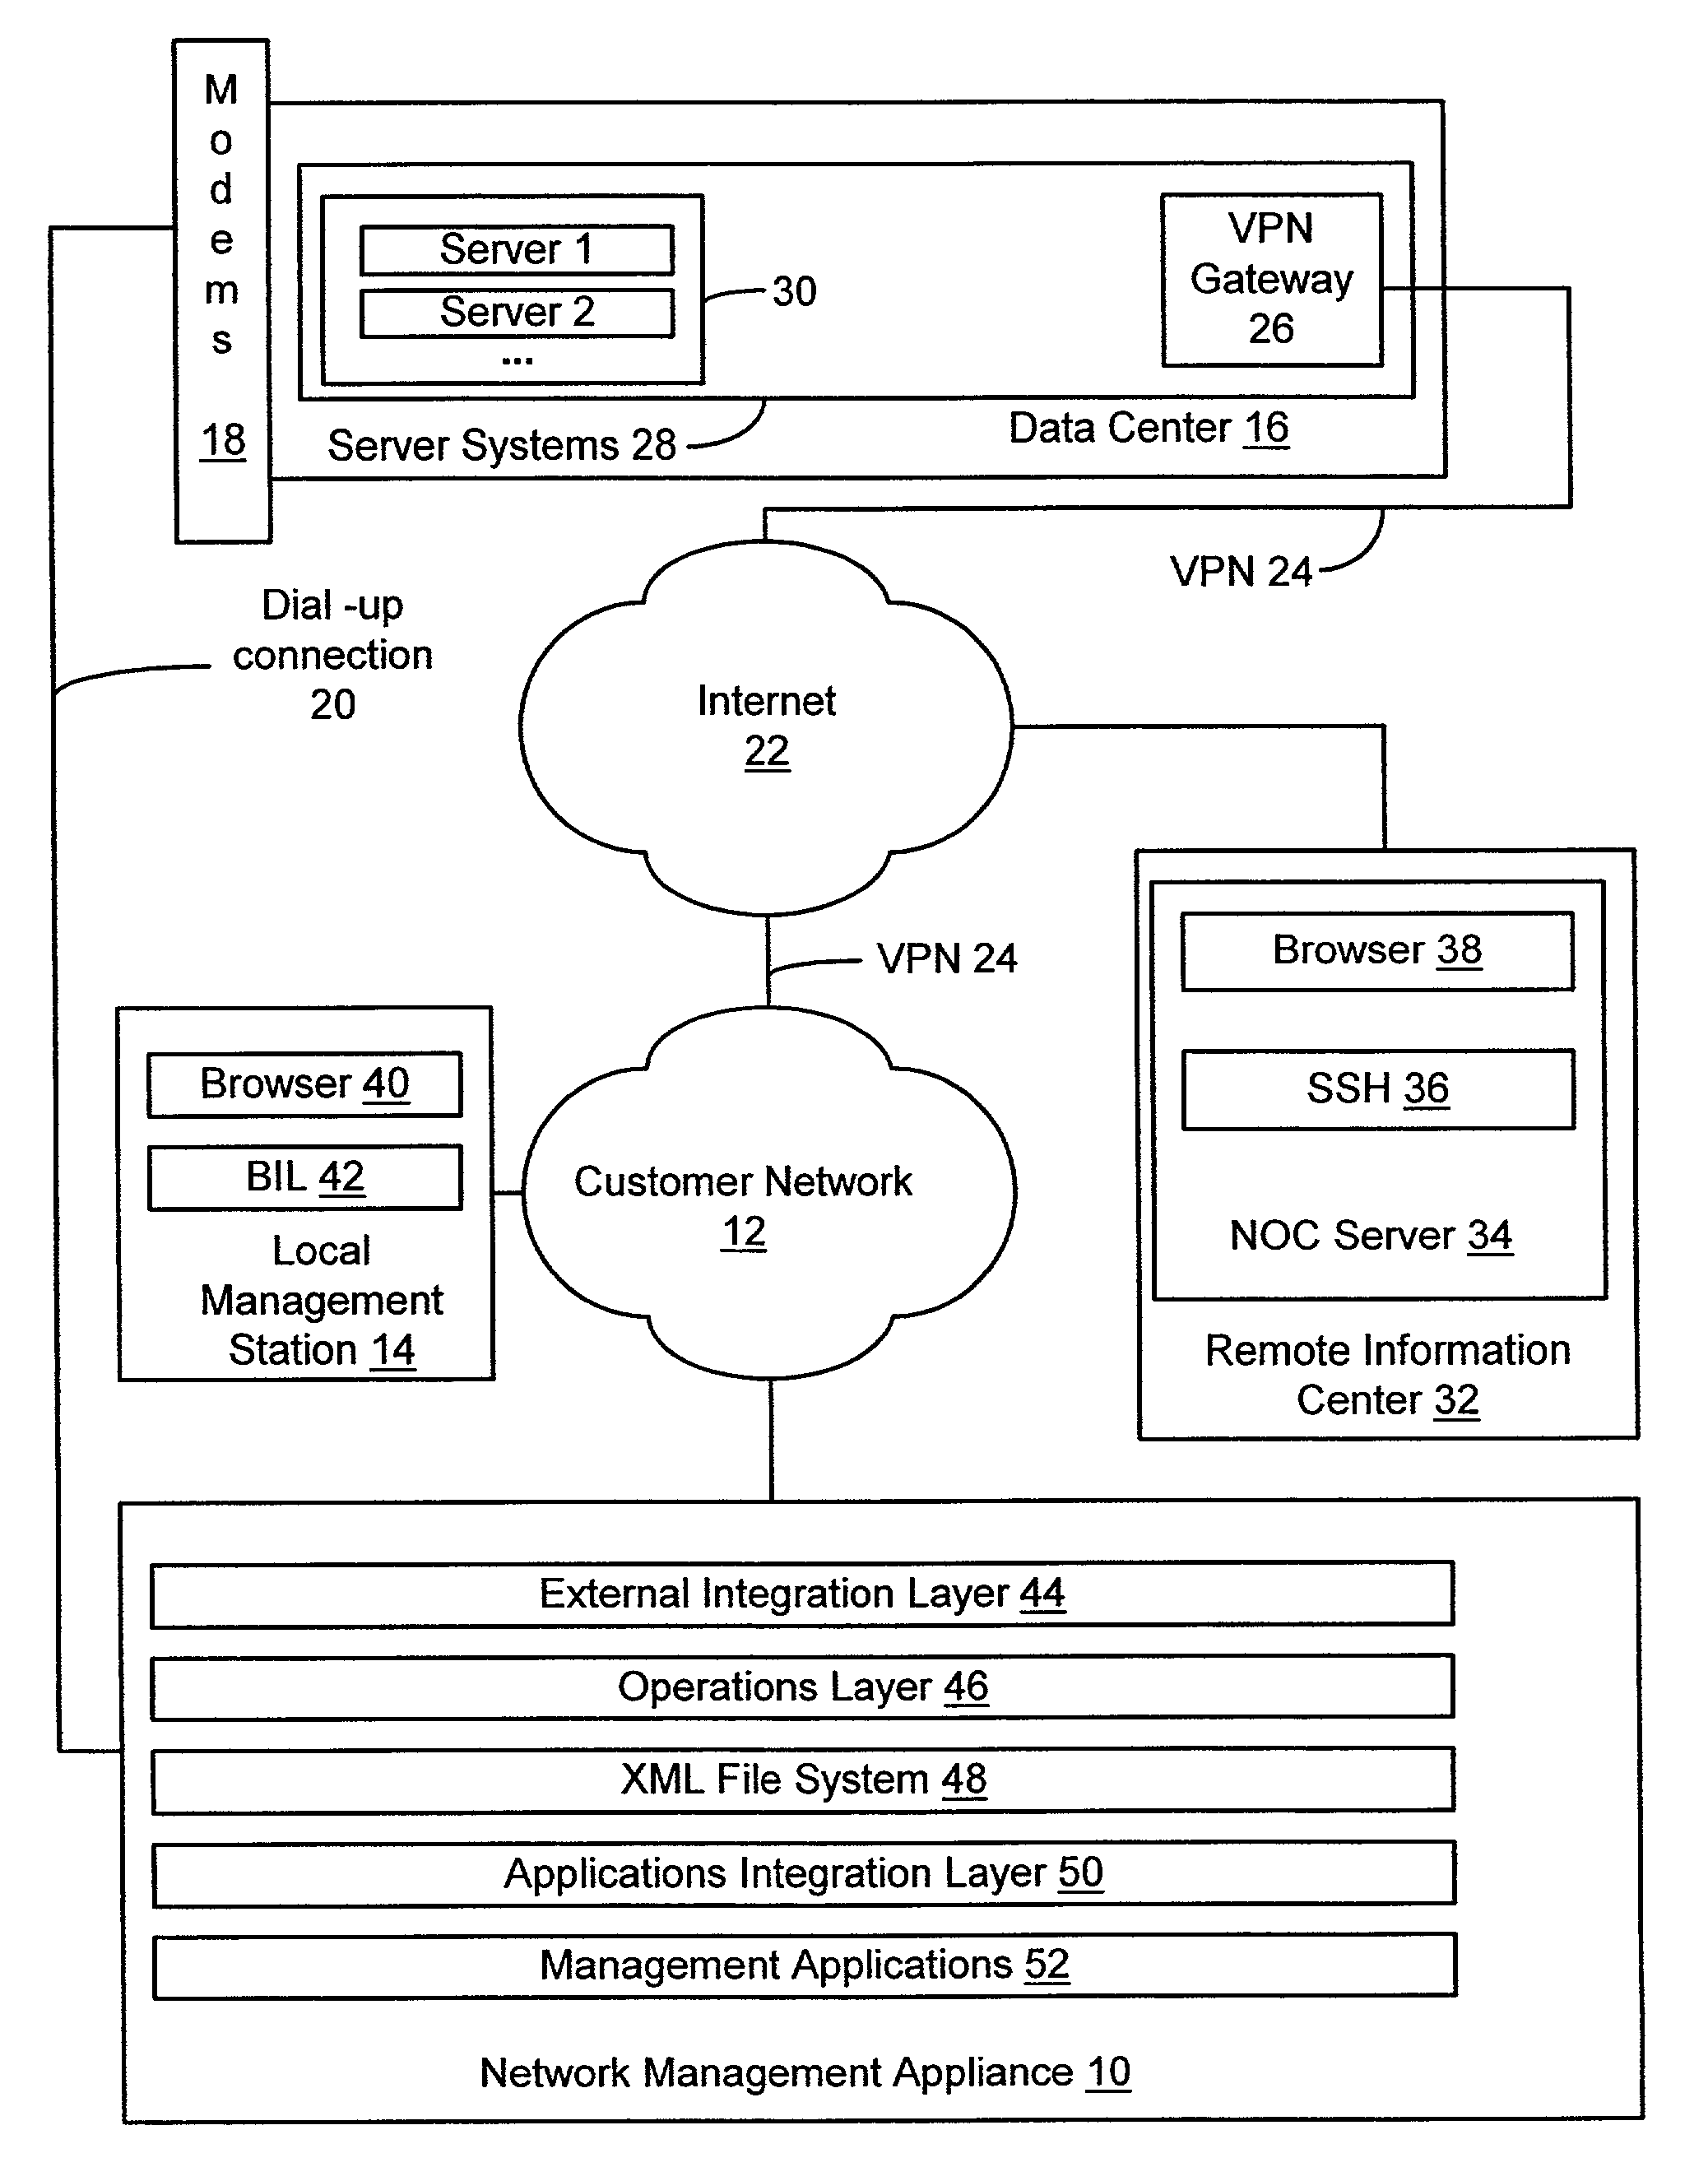 Distributed network monitoring and control system